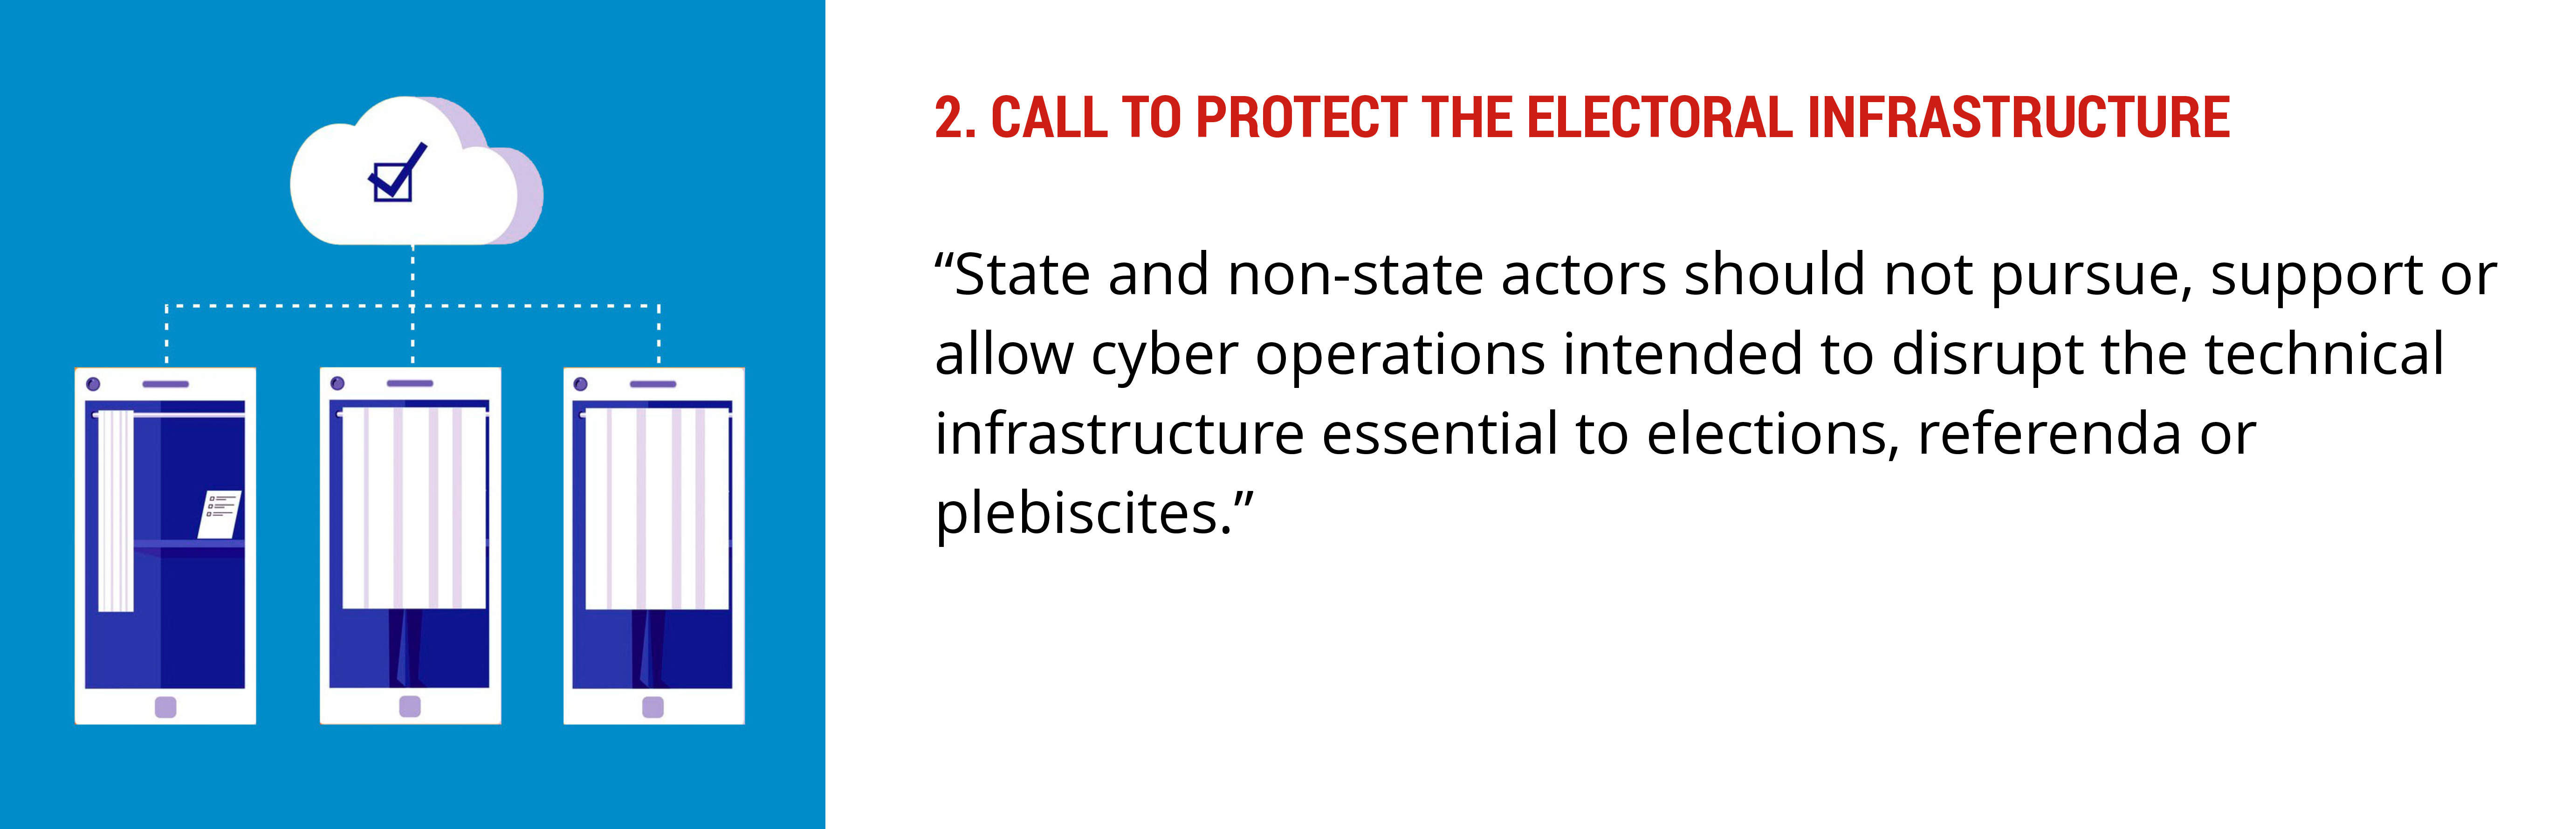 Norm to Protect the Electoral Infrastructure